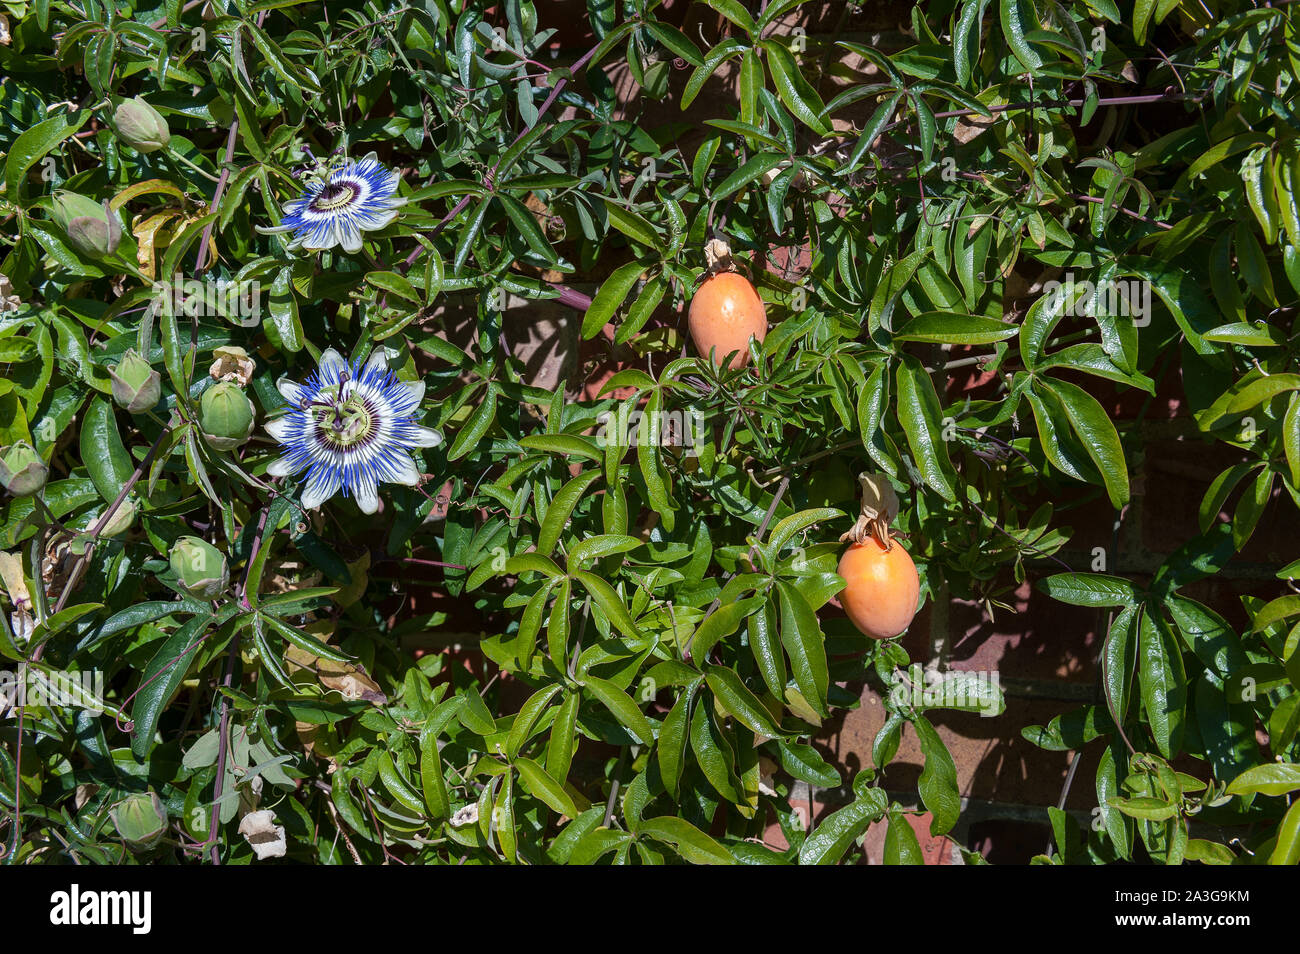 Ripe Orange And Ripening Green Egg Shaped Fruit Of The Passion Flower Plant Passiflora Caerulea Blue Crown Against Dense Foliage Stock Photo Alamy